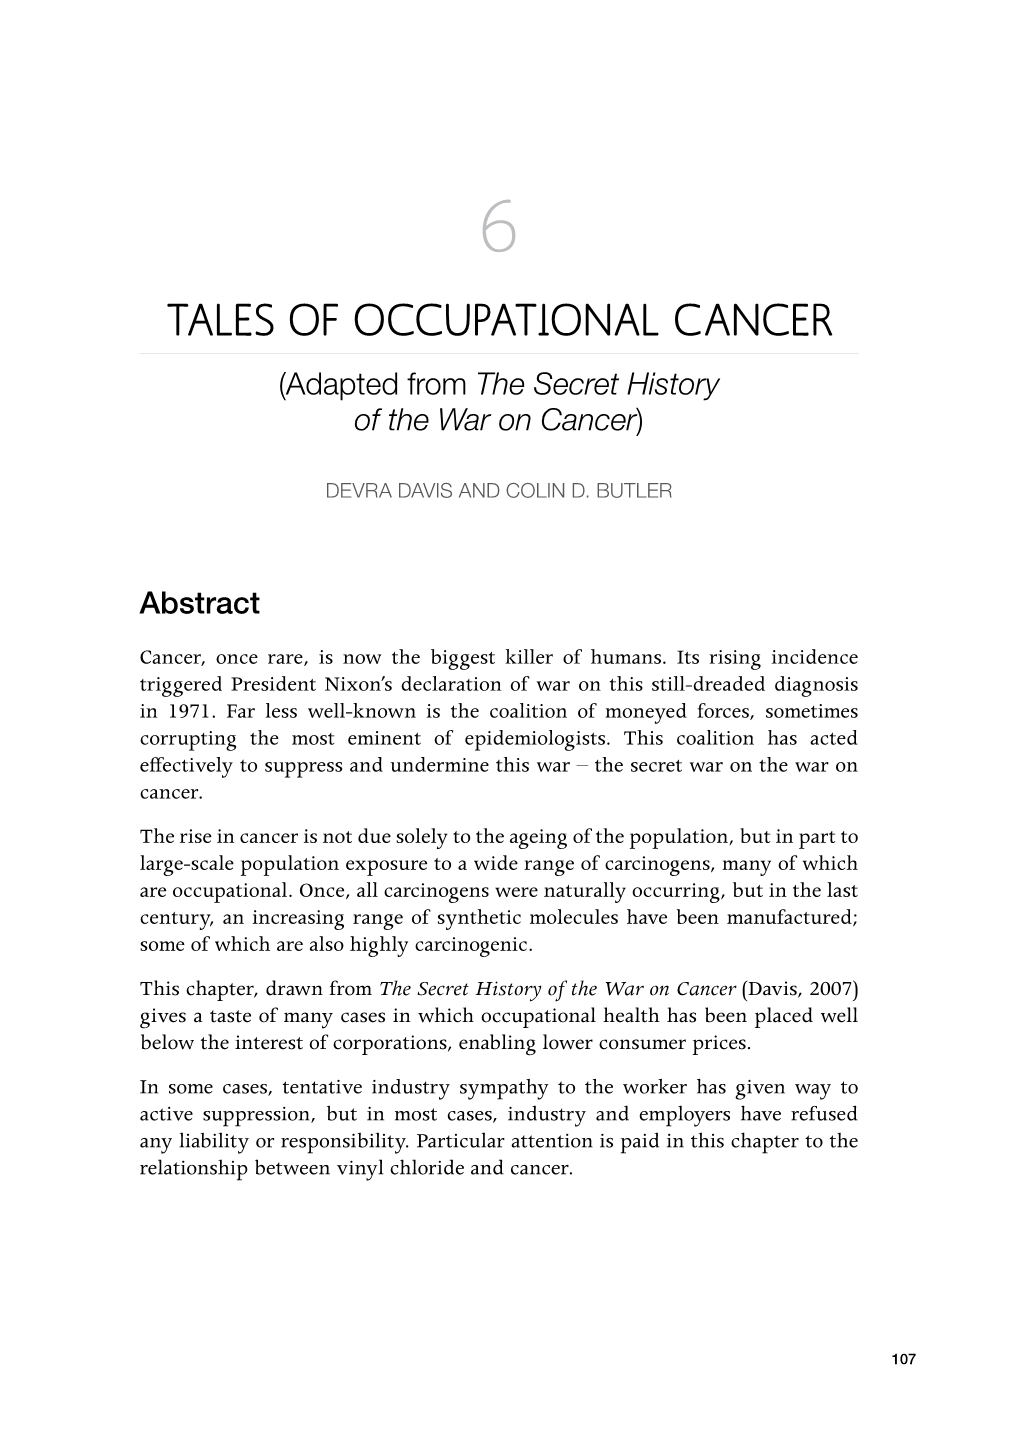 The Secret History of the War on Cancer)